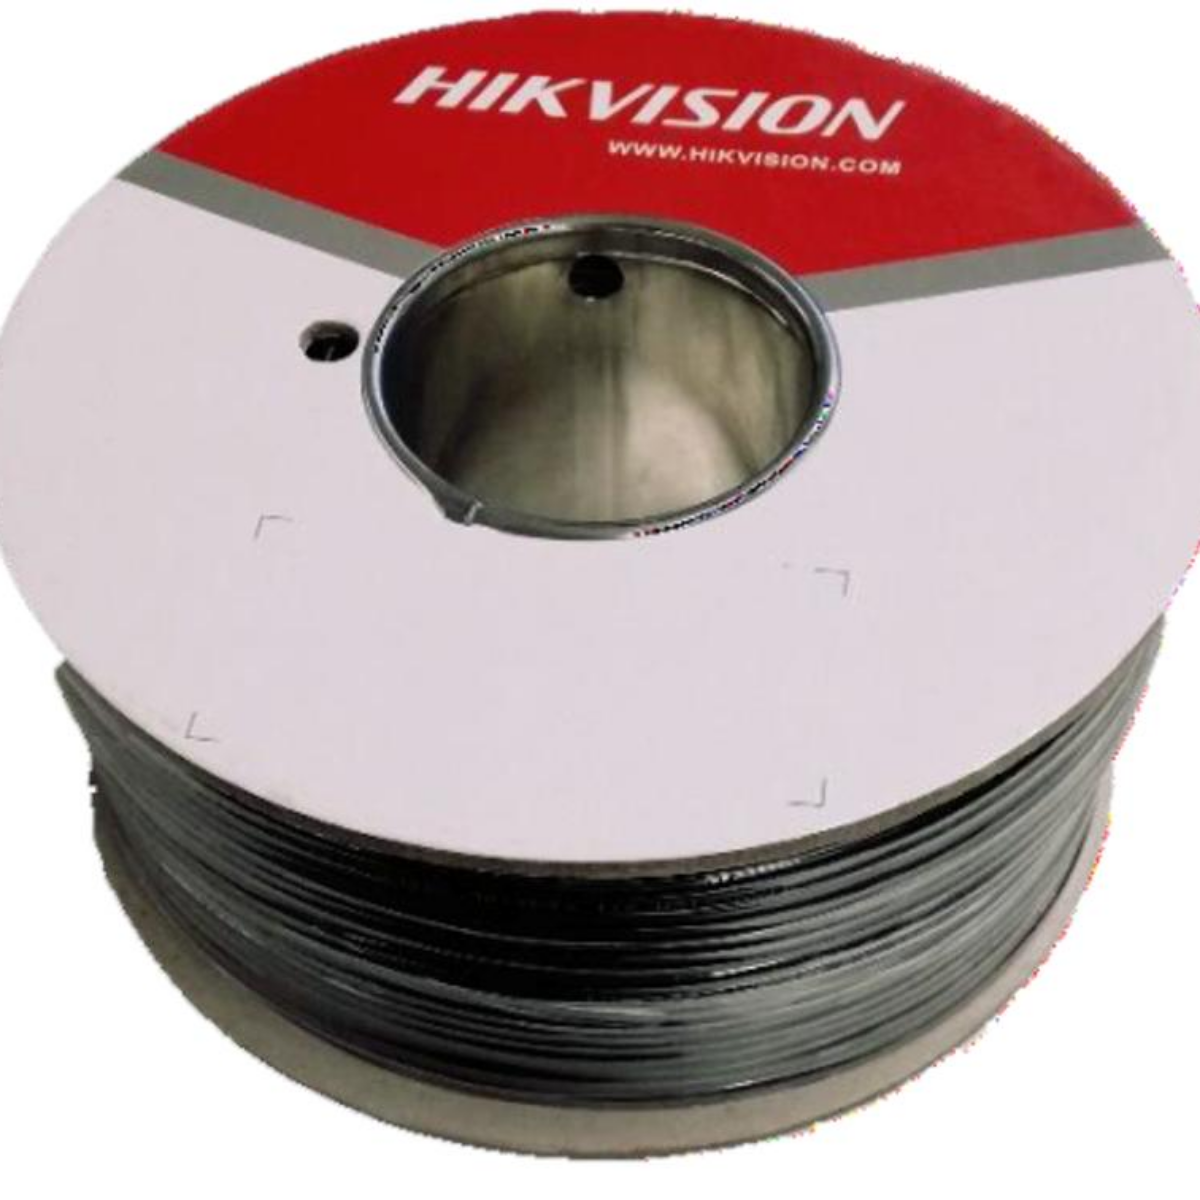 Hikvision 90m Mini RG59 Coaxial Cable with Power Cable – DS-1LH1SCA3C-090B